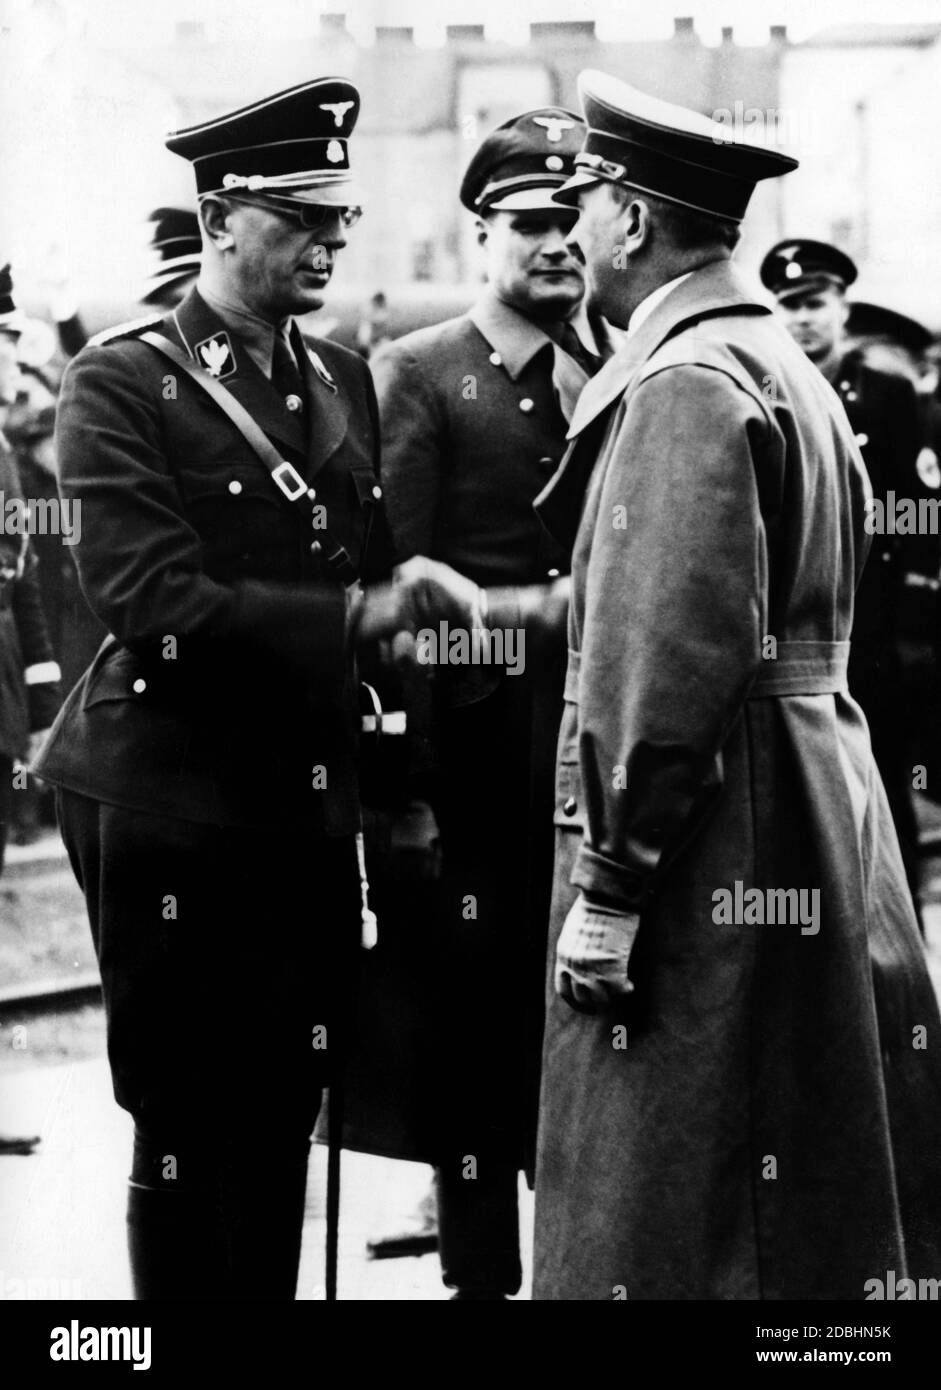 Adolf Hitler welcomes Arthur Seys-Inquart in the uniform of an SS-Gruppenfuehrer. He had received this rank as a formality after joining the NSDAP on March 13, 1938. Between them is presumably Hans Frank. Stock Photo